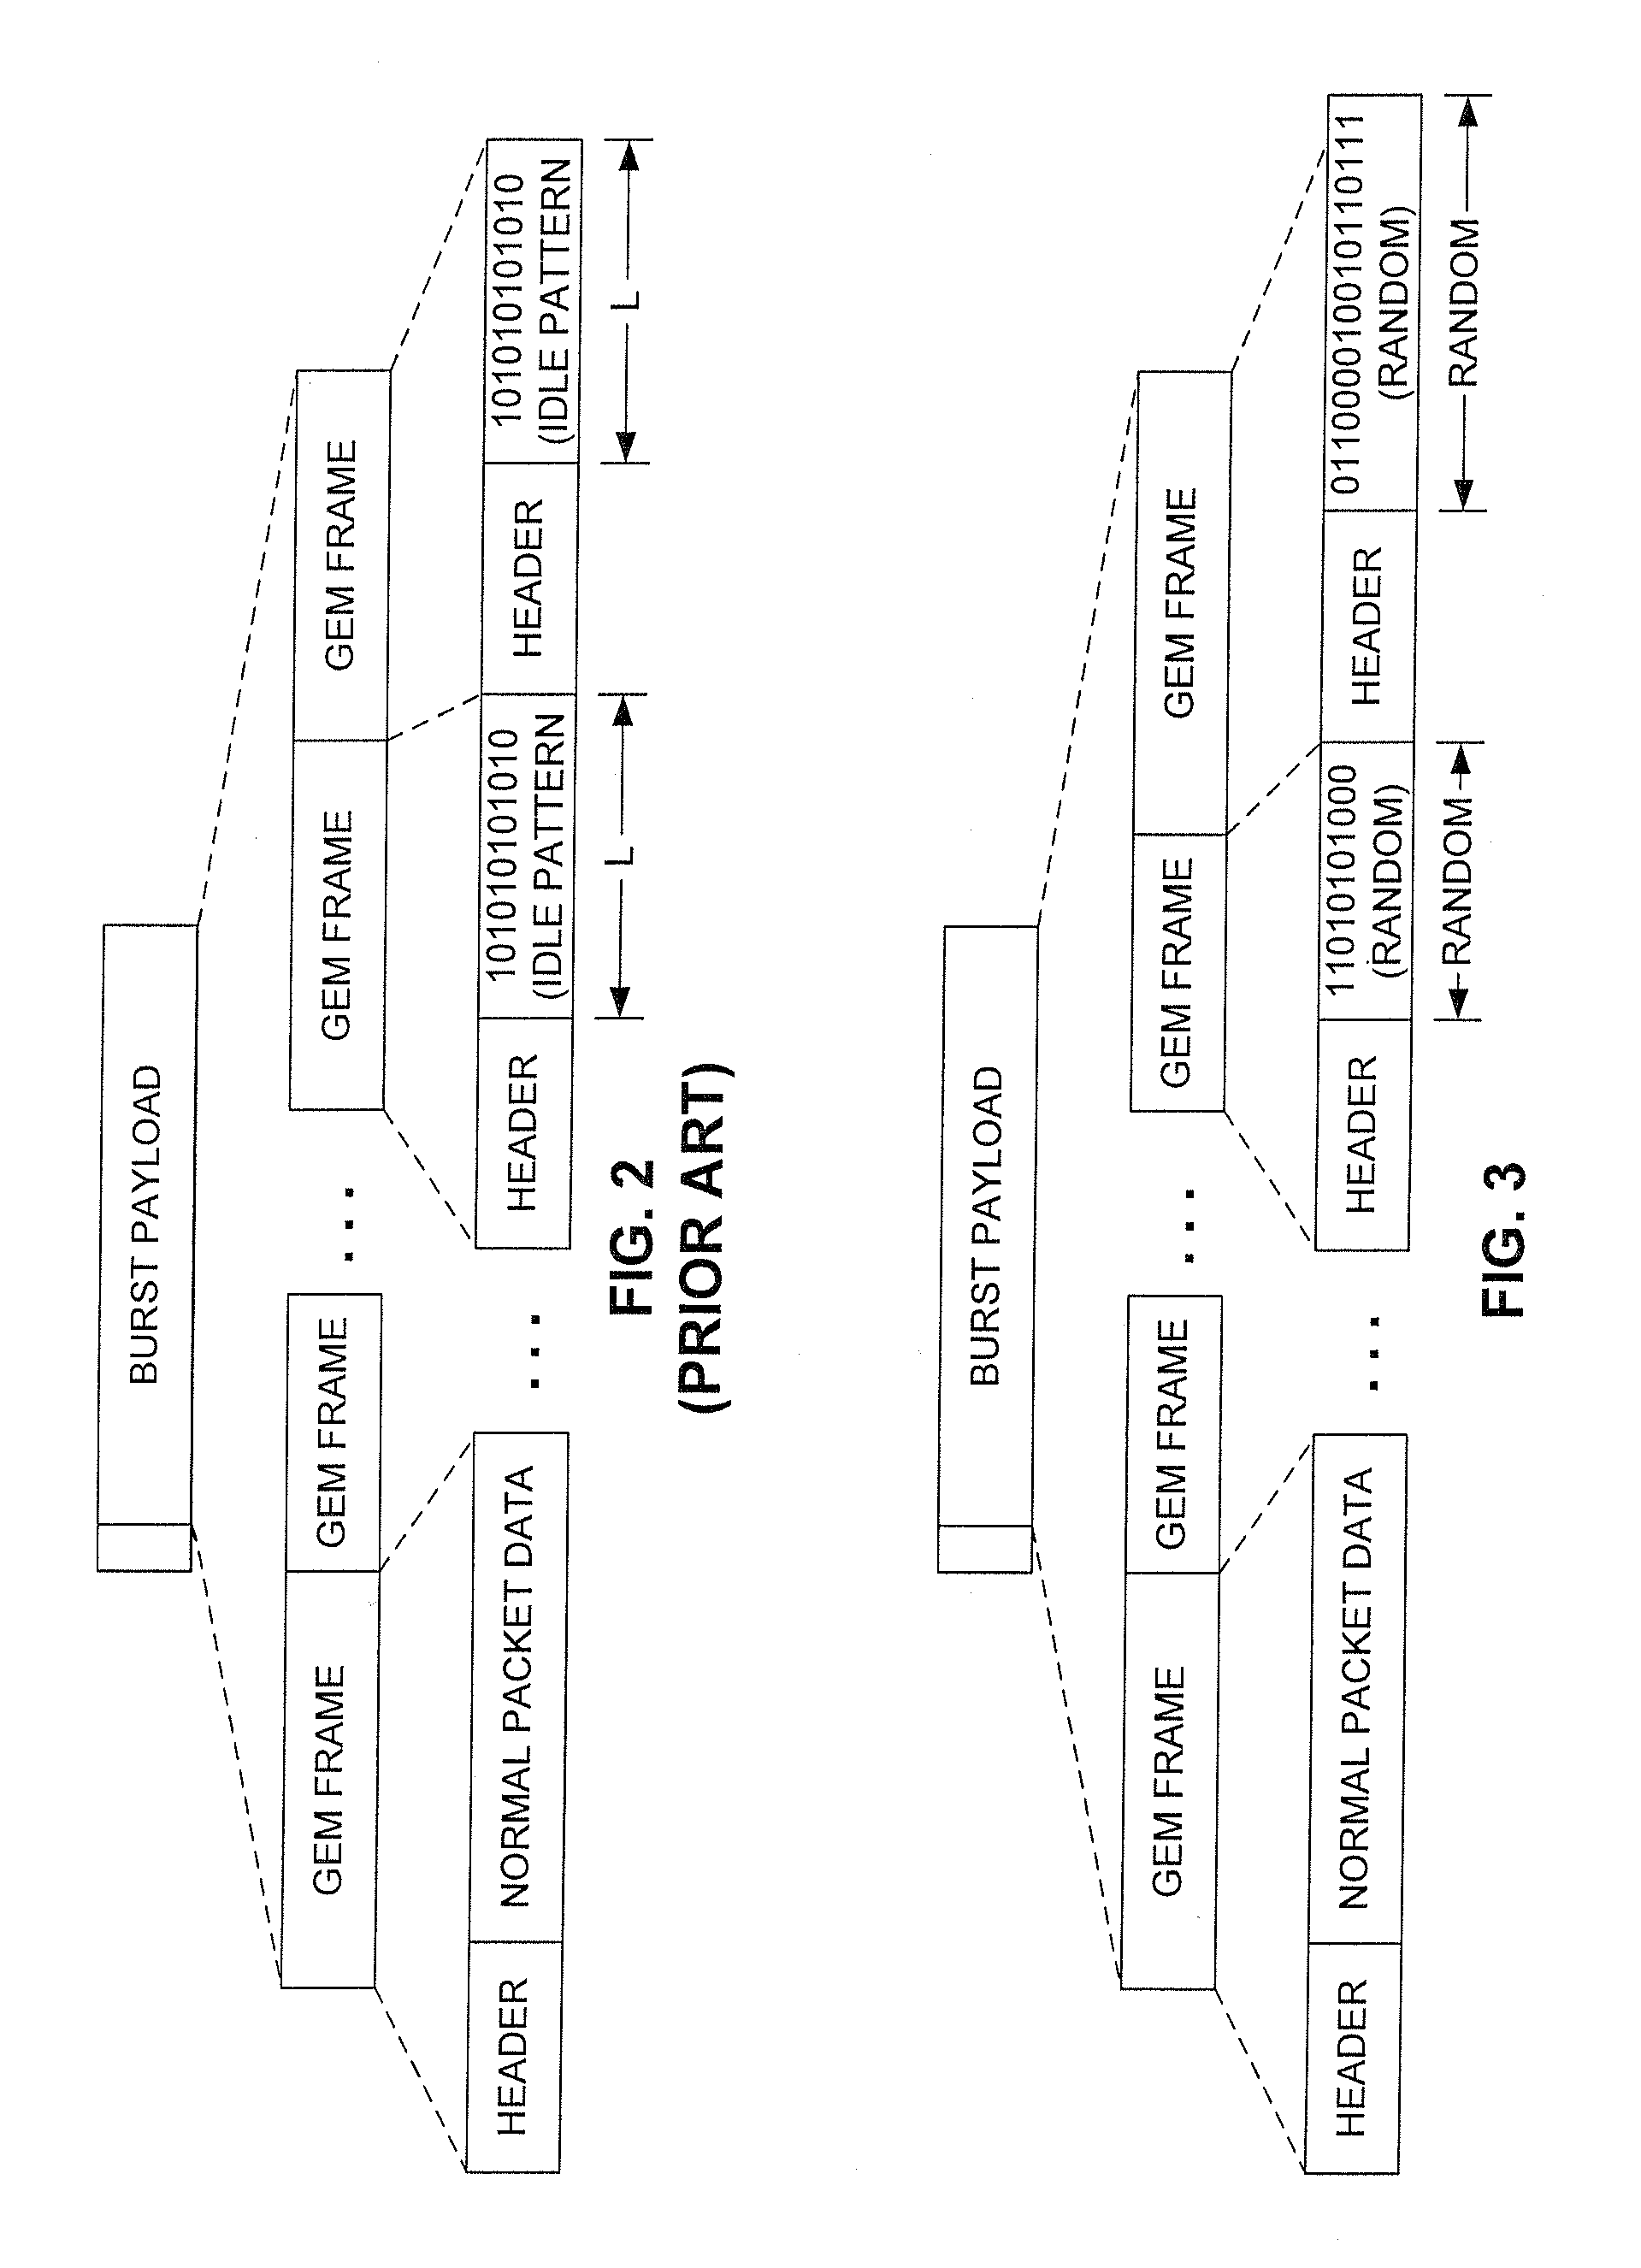 Method and apparatus to reduce the impact of raman interference in passive optical networks with RF video overlay